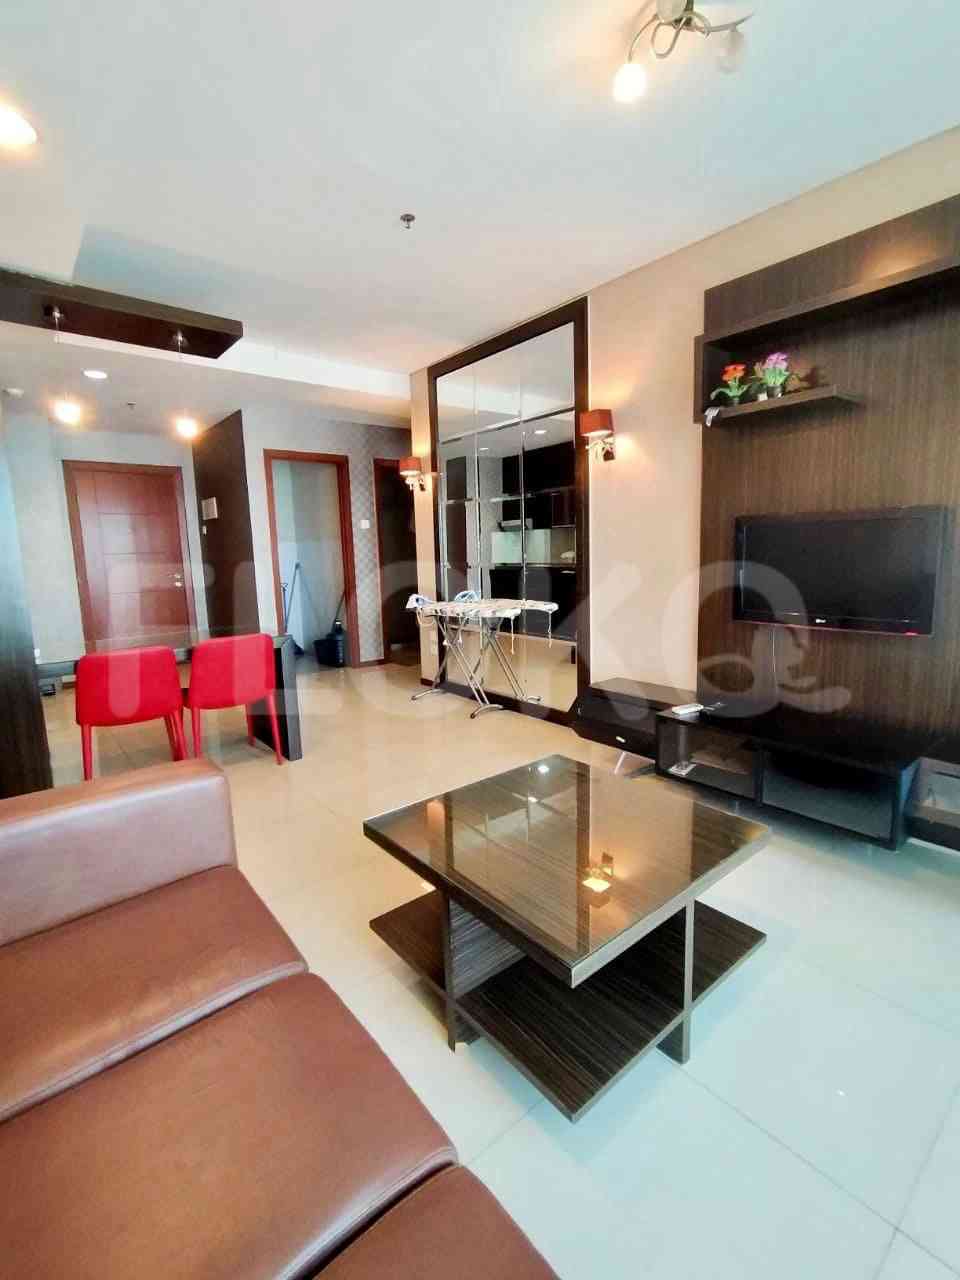 2 Bedroom on 17th Floor for Rent in Thamrin Residence Apartment - fth075 2